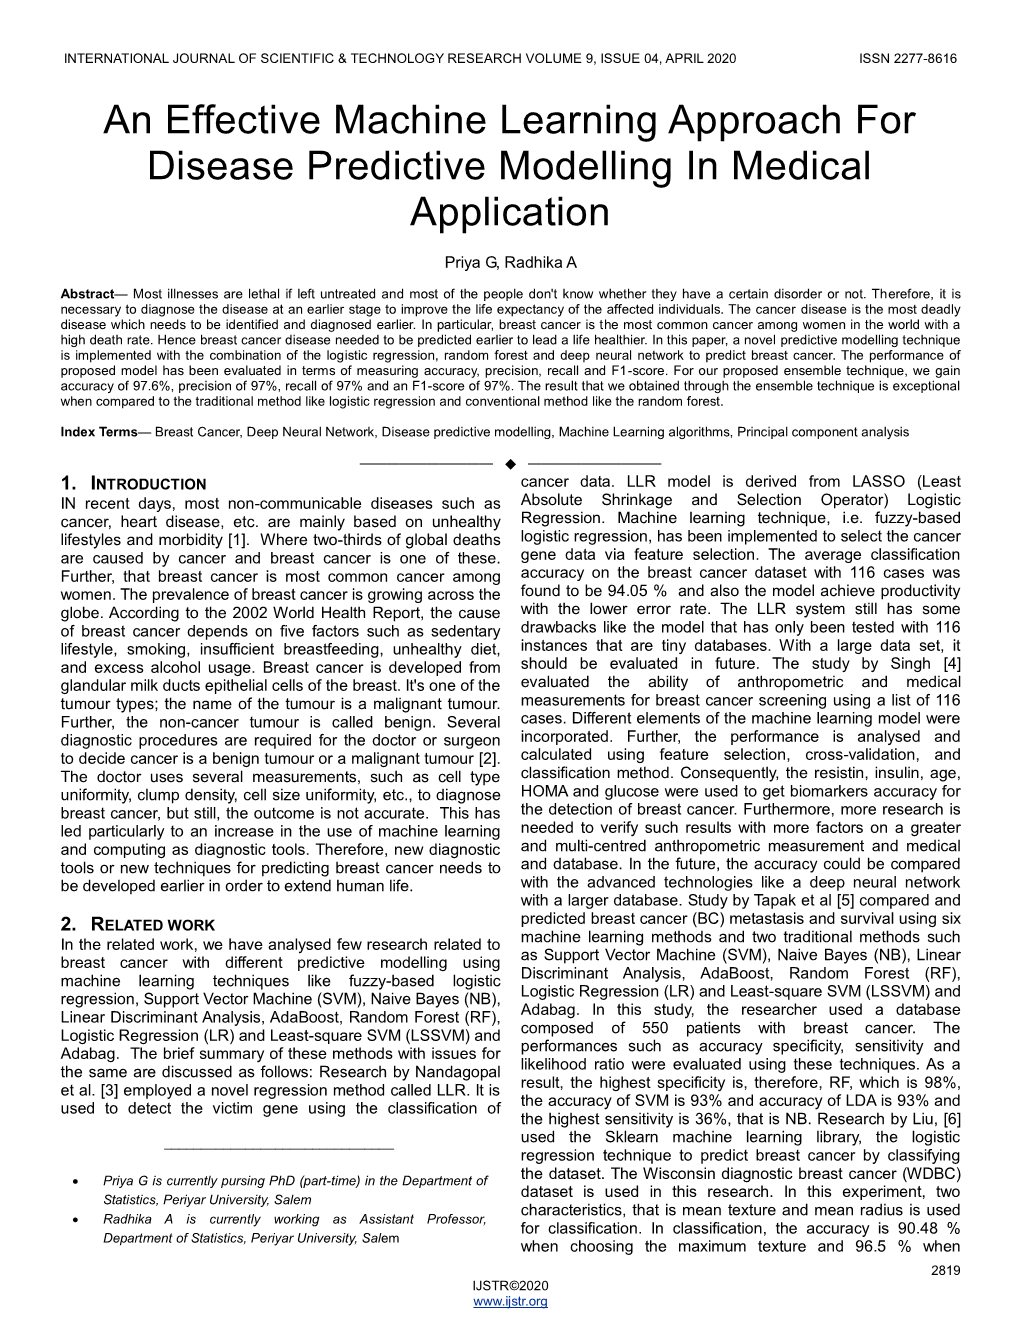 An Effective Machine Learning Approach for Disease Predictive Modelling in Medical Application